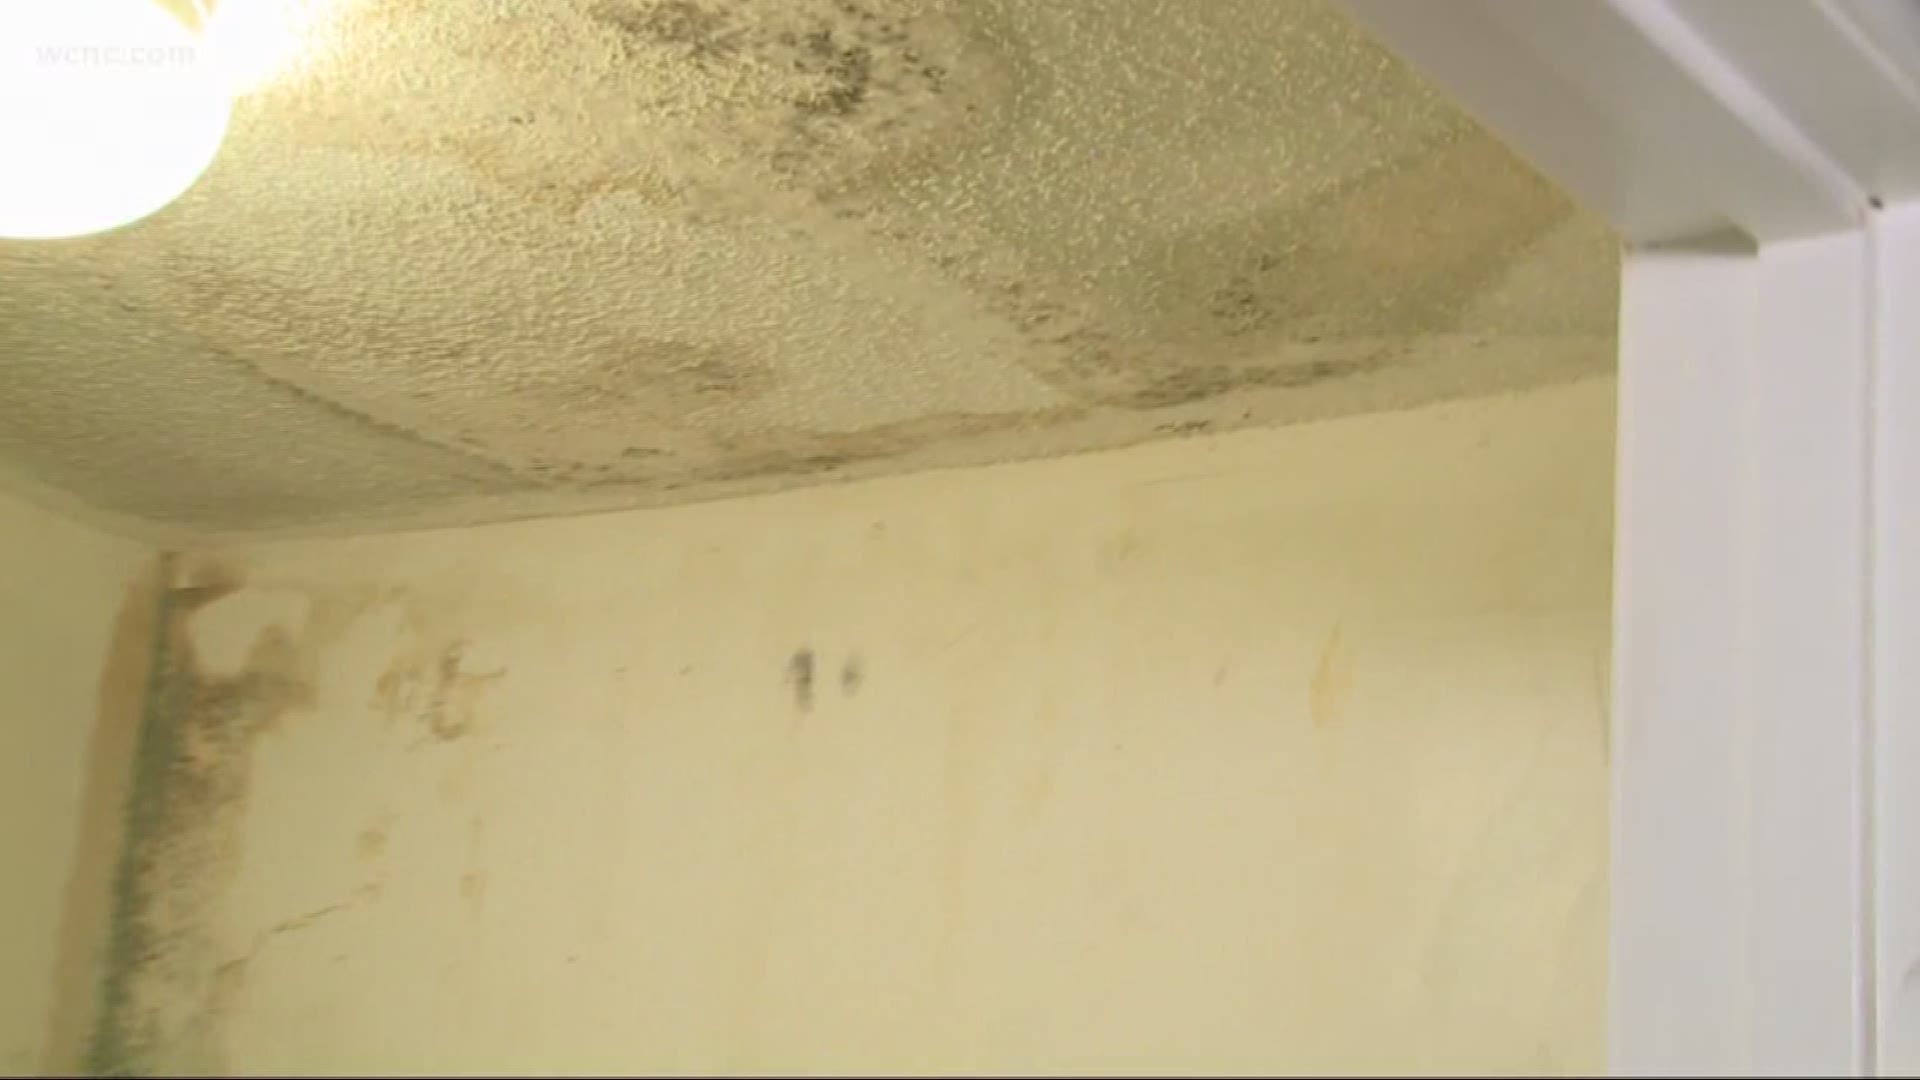 A video shows a laundry room wall covered in mold.